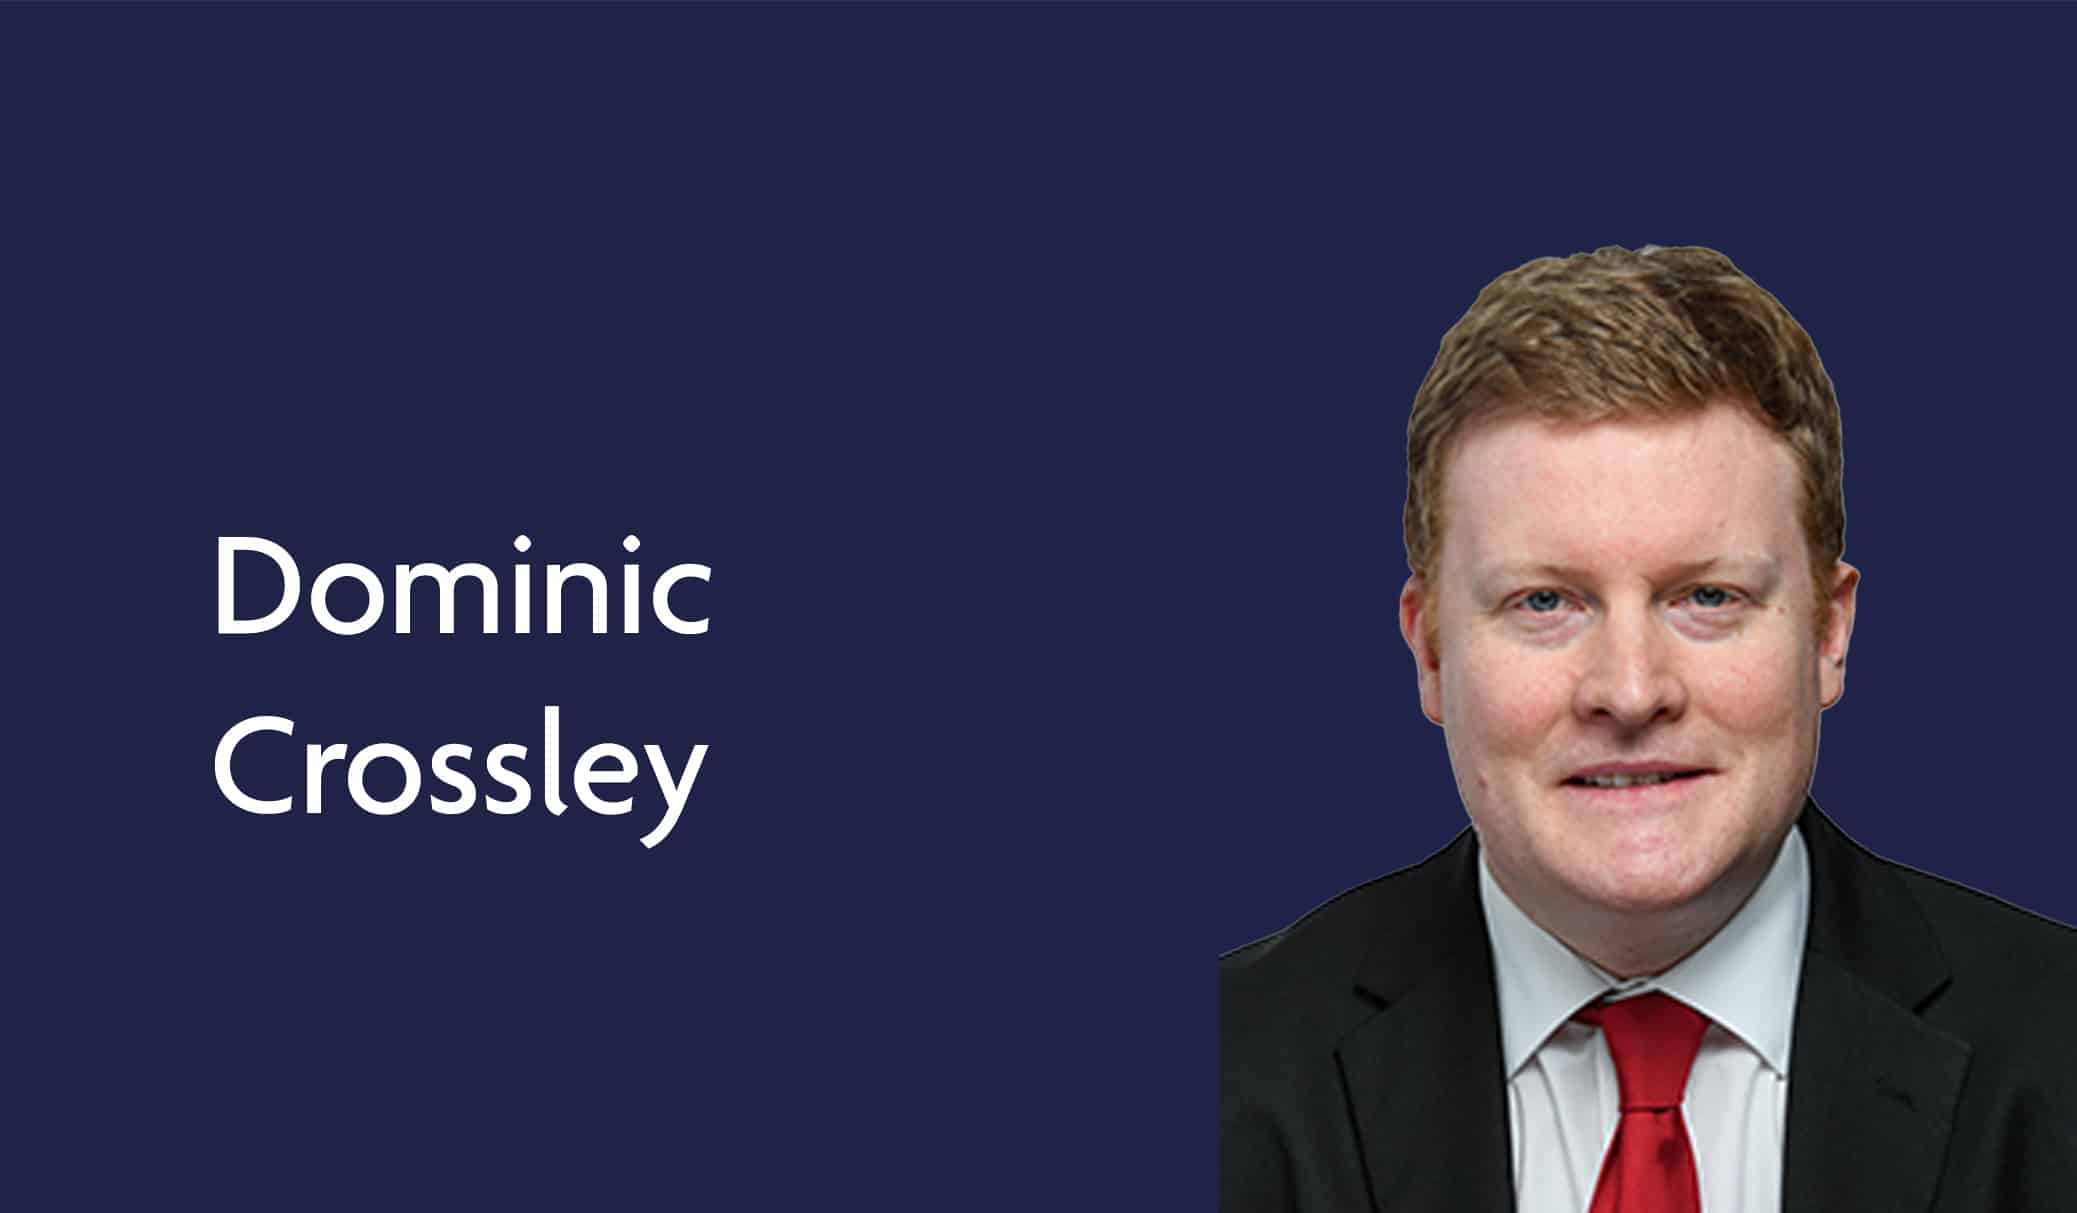 Parklane Plowden’s Chancery & Commercial Team are delighted to welcome Dominic Crossley